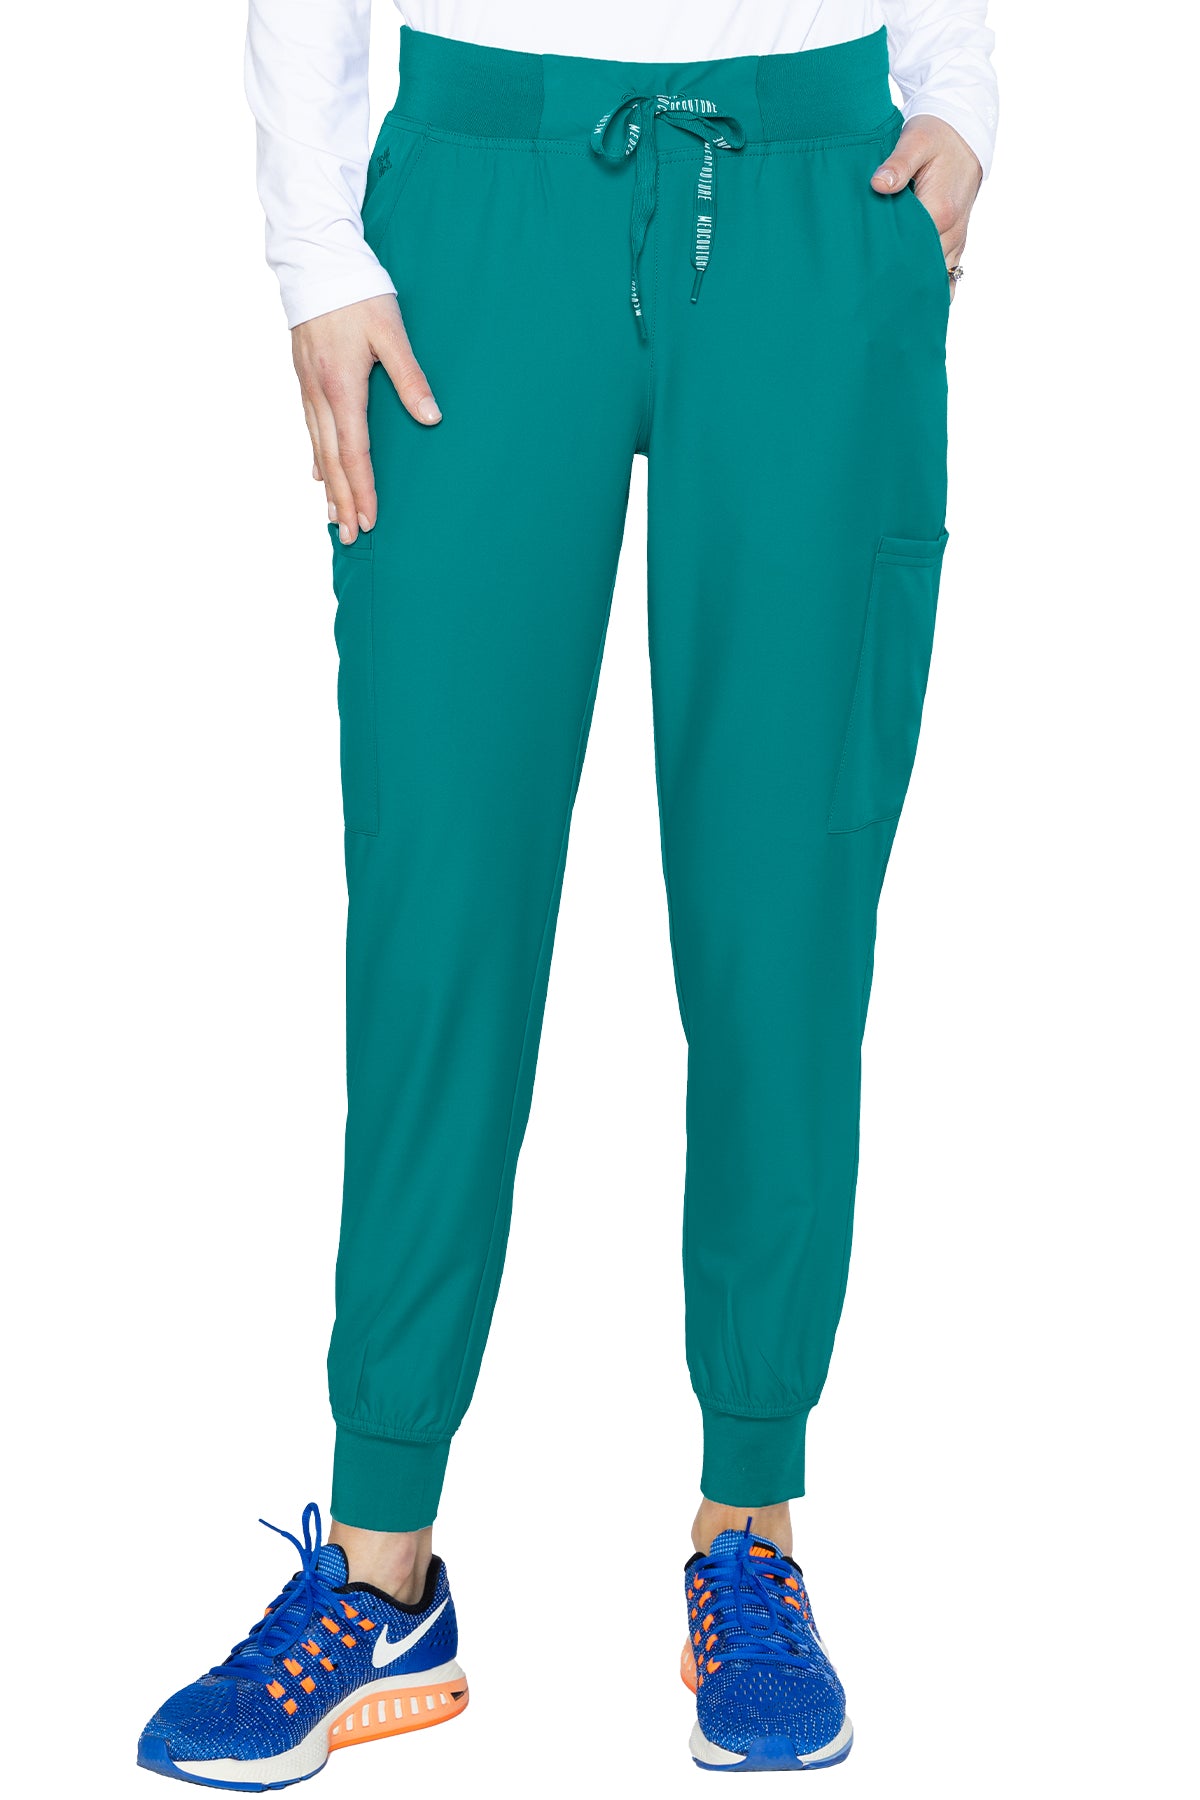 Med Couture Teal Blue PANT